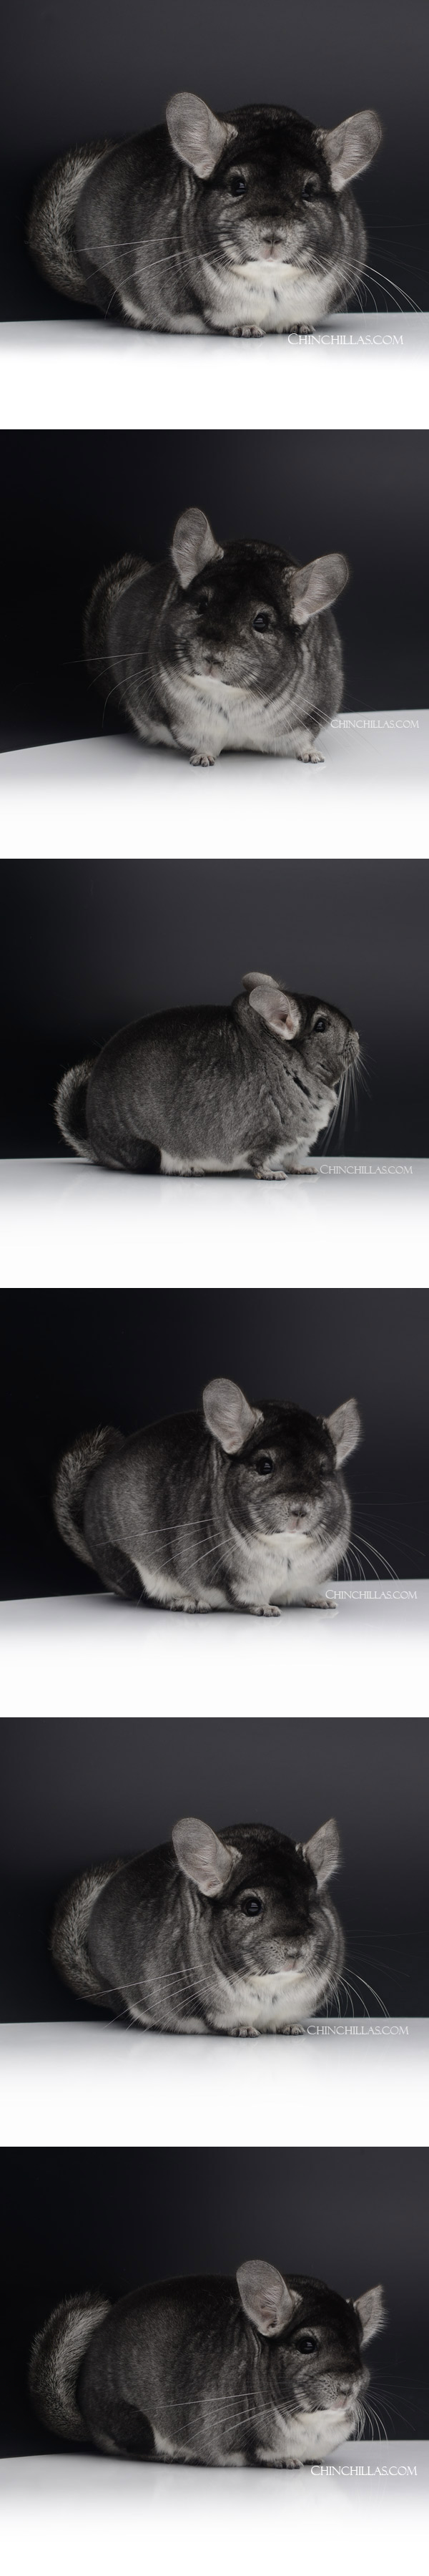 Chinchilla or related item offered for sale or export on Chinchillas.com - 23031 Large Reserve Class Champion Standard Male Chinchilla